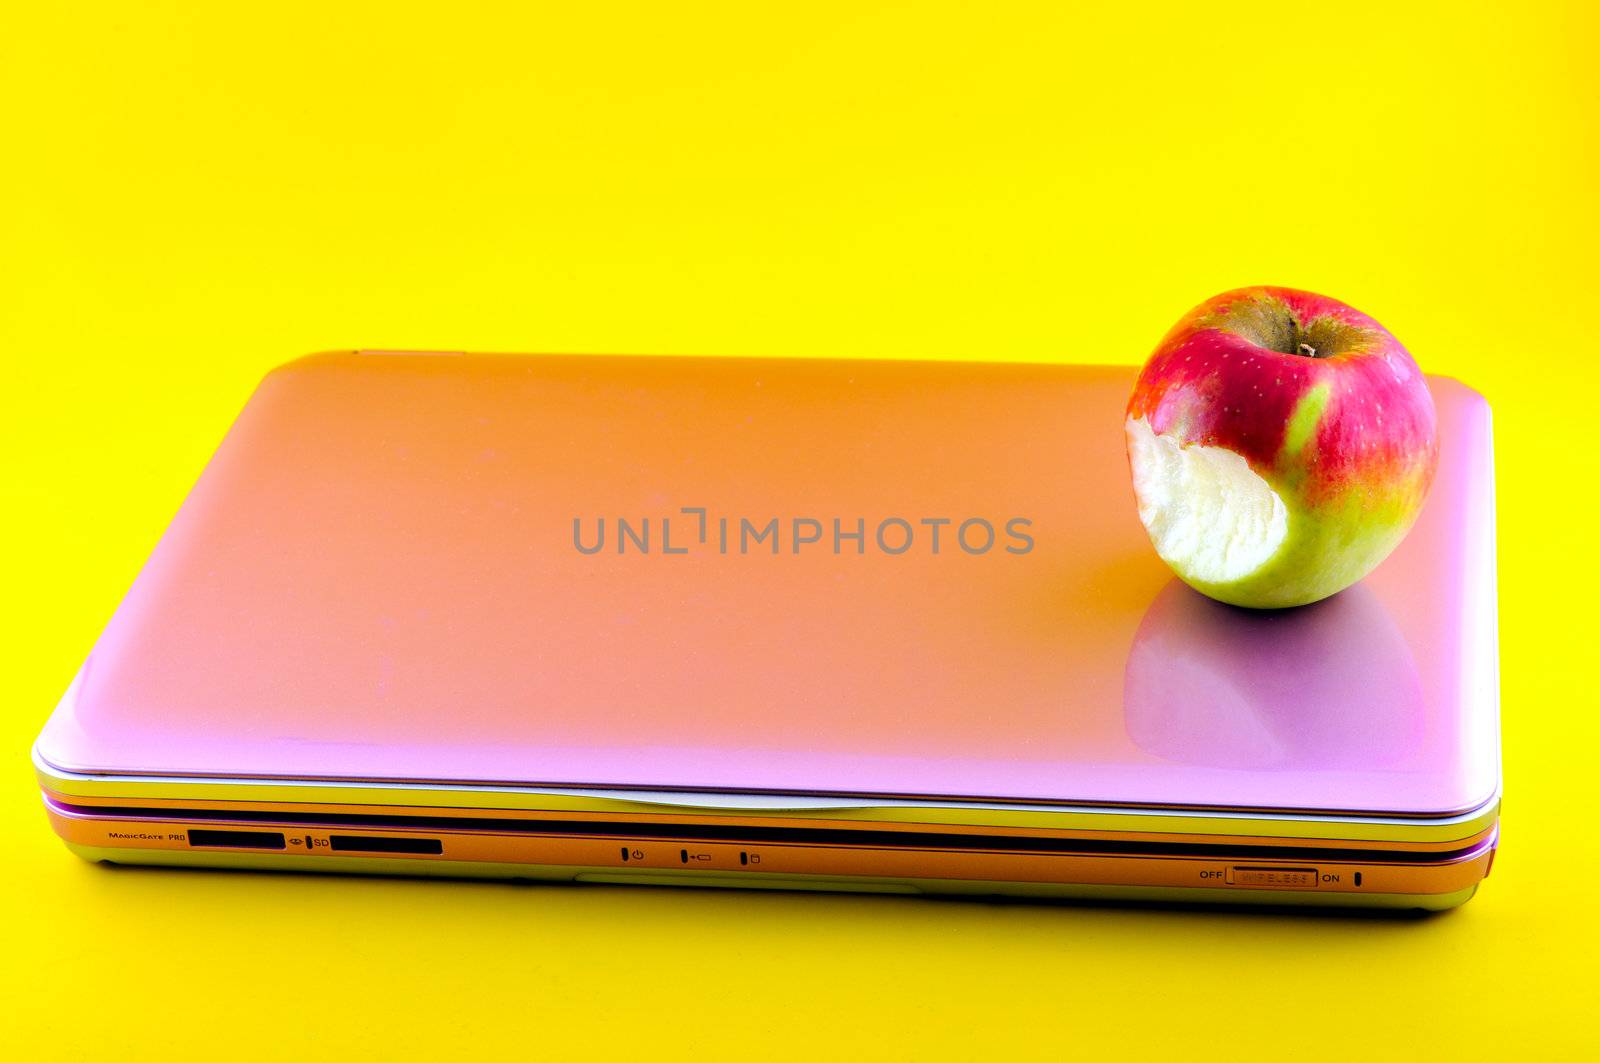 Pink computer that is bitten apple, photographed against a yellow background